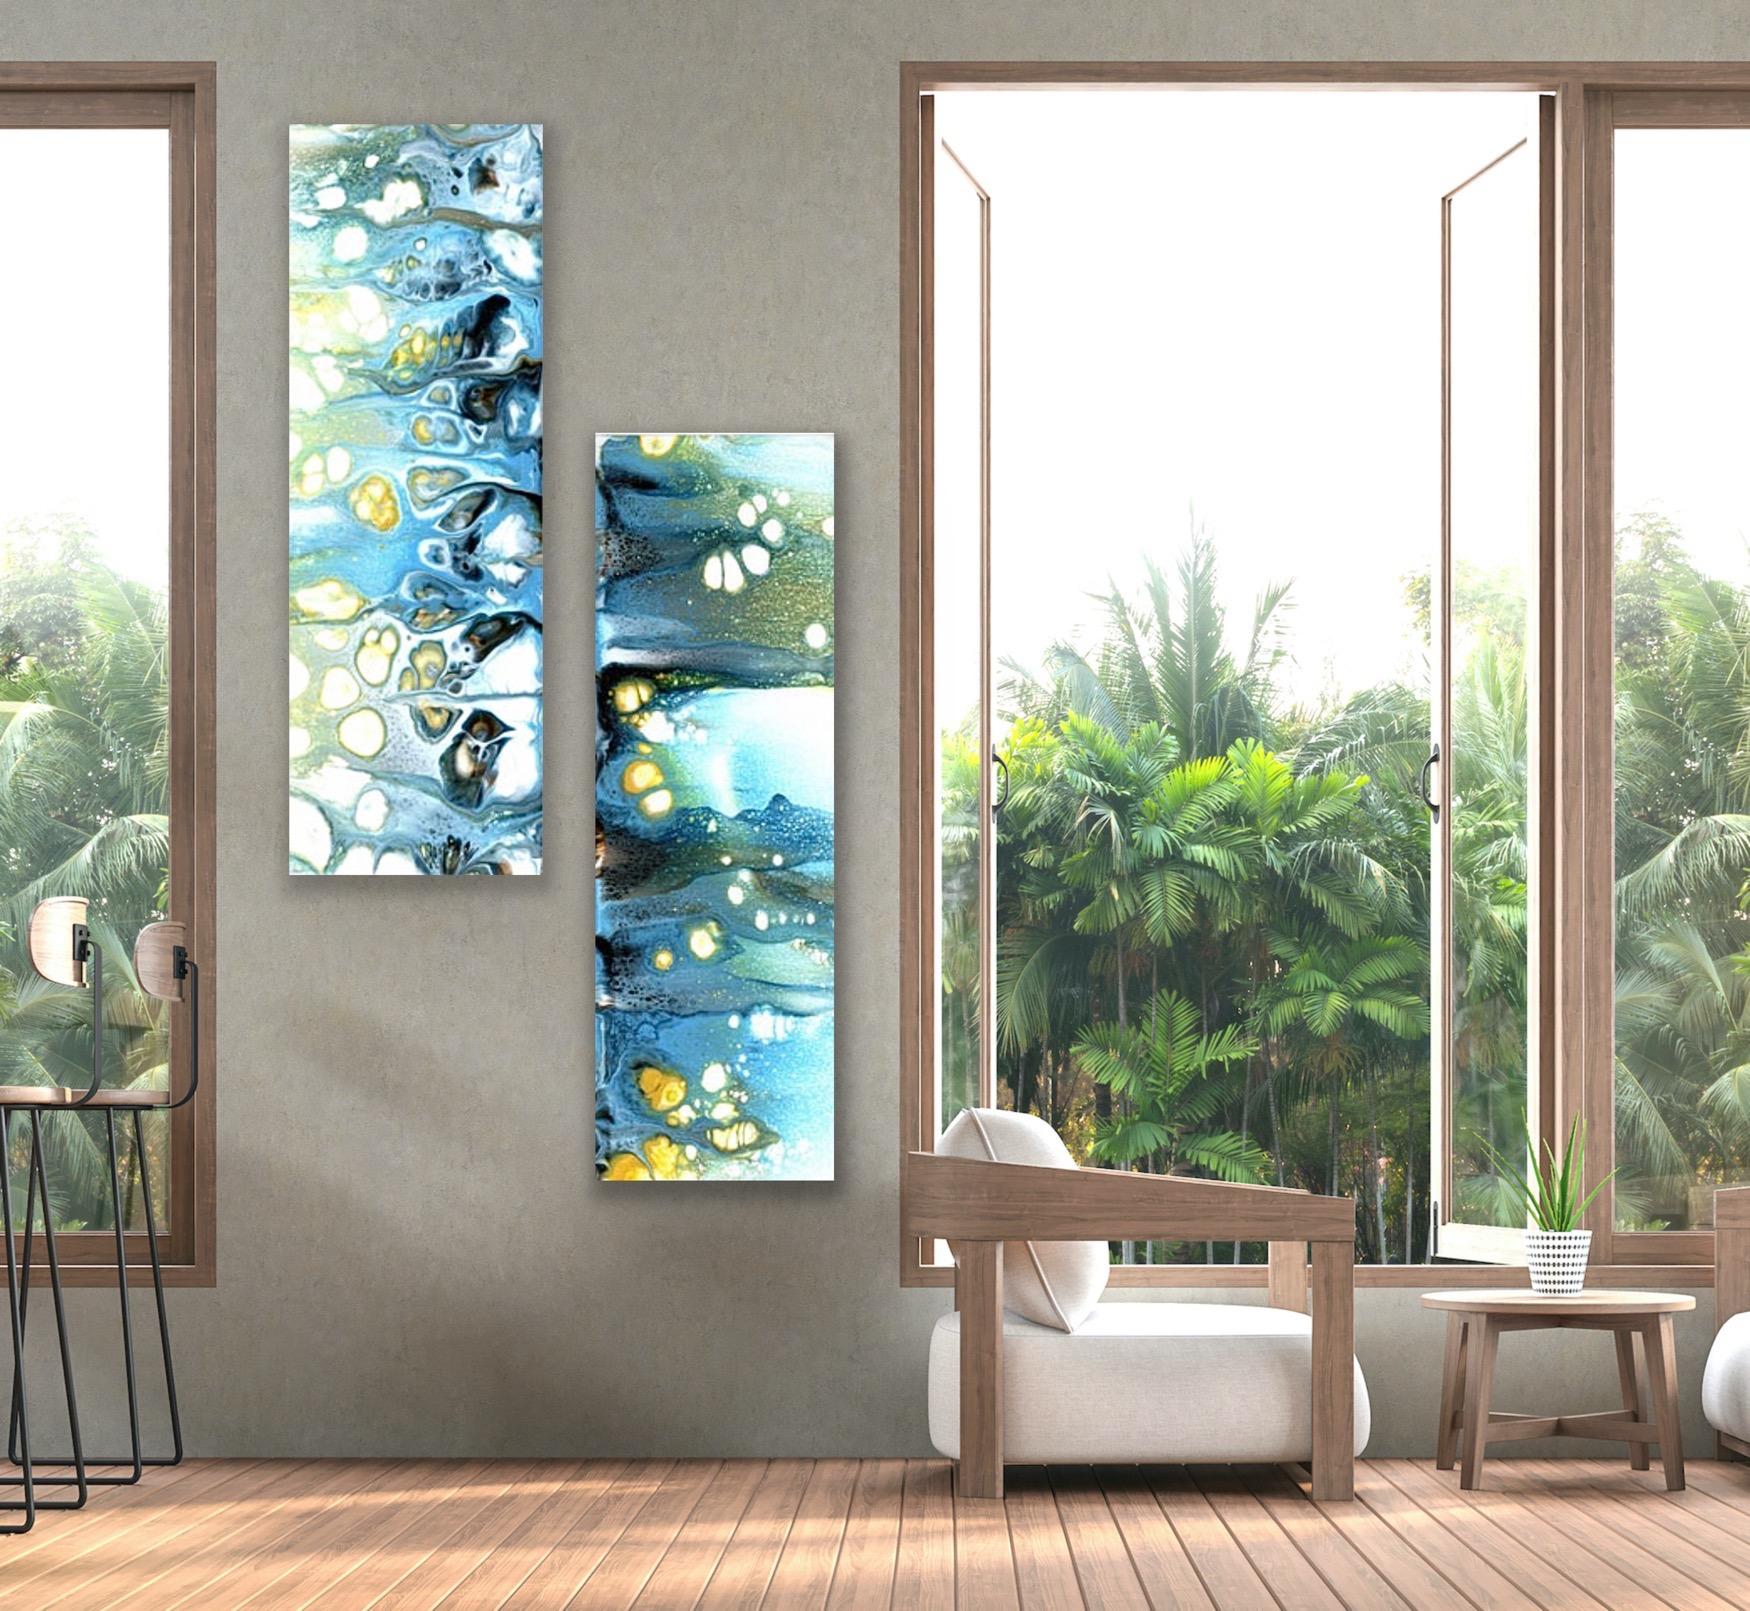 Modern Abstract Painting Diptych, Celeste Reiter, Signed Limited Edition Giclee’ For Sale 4